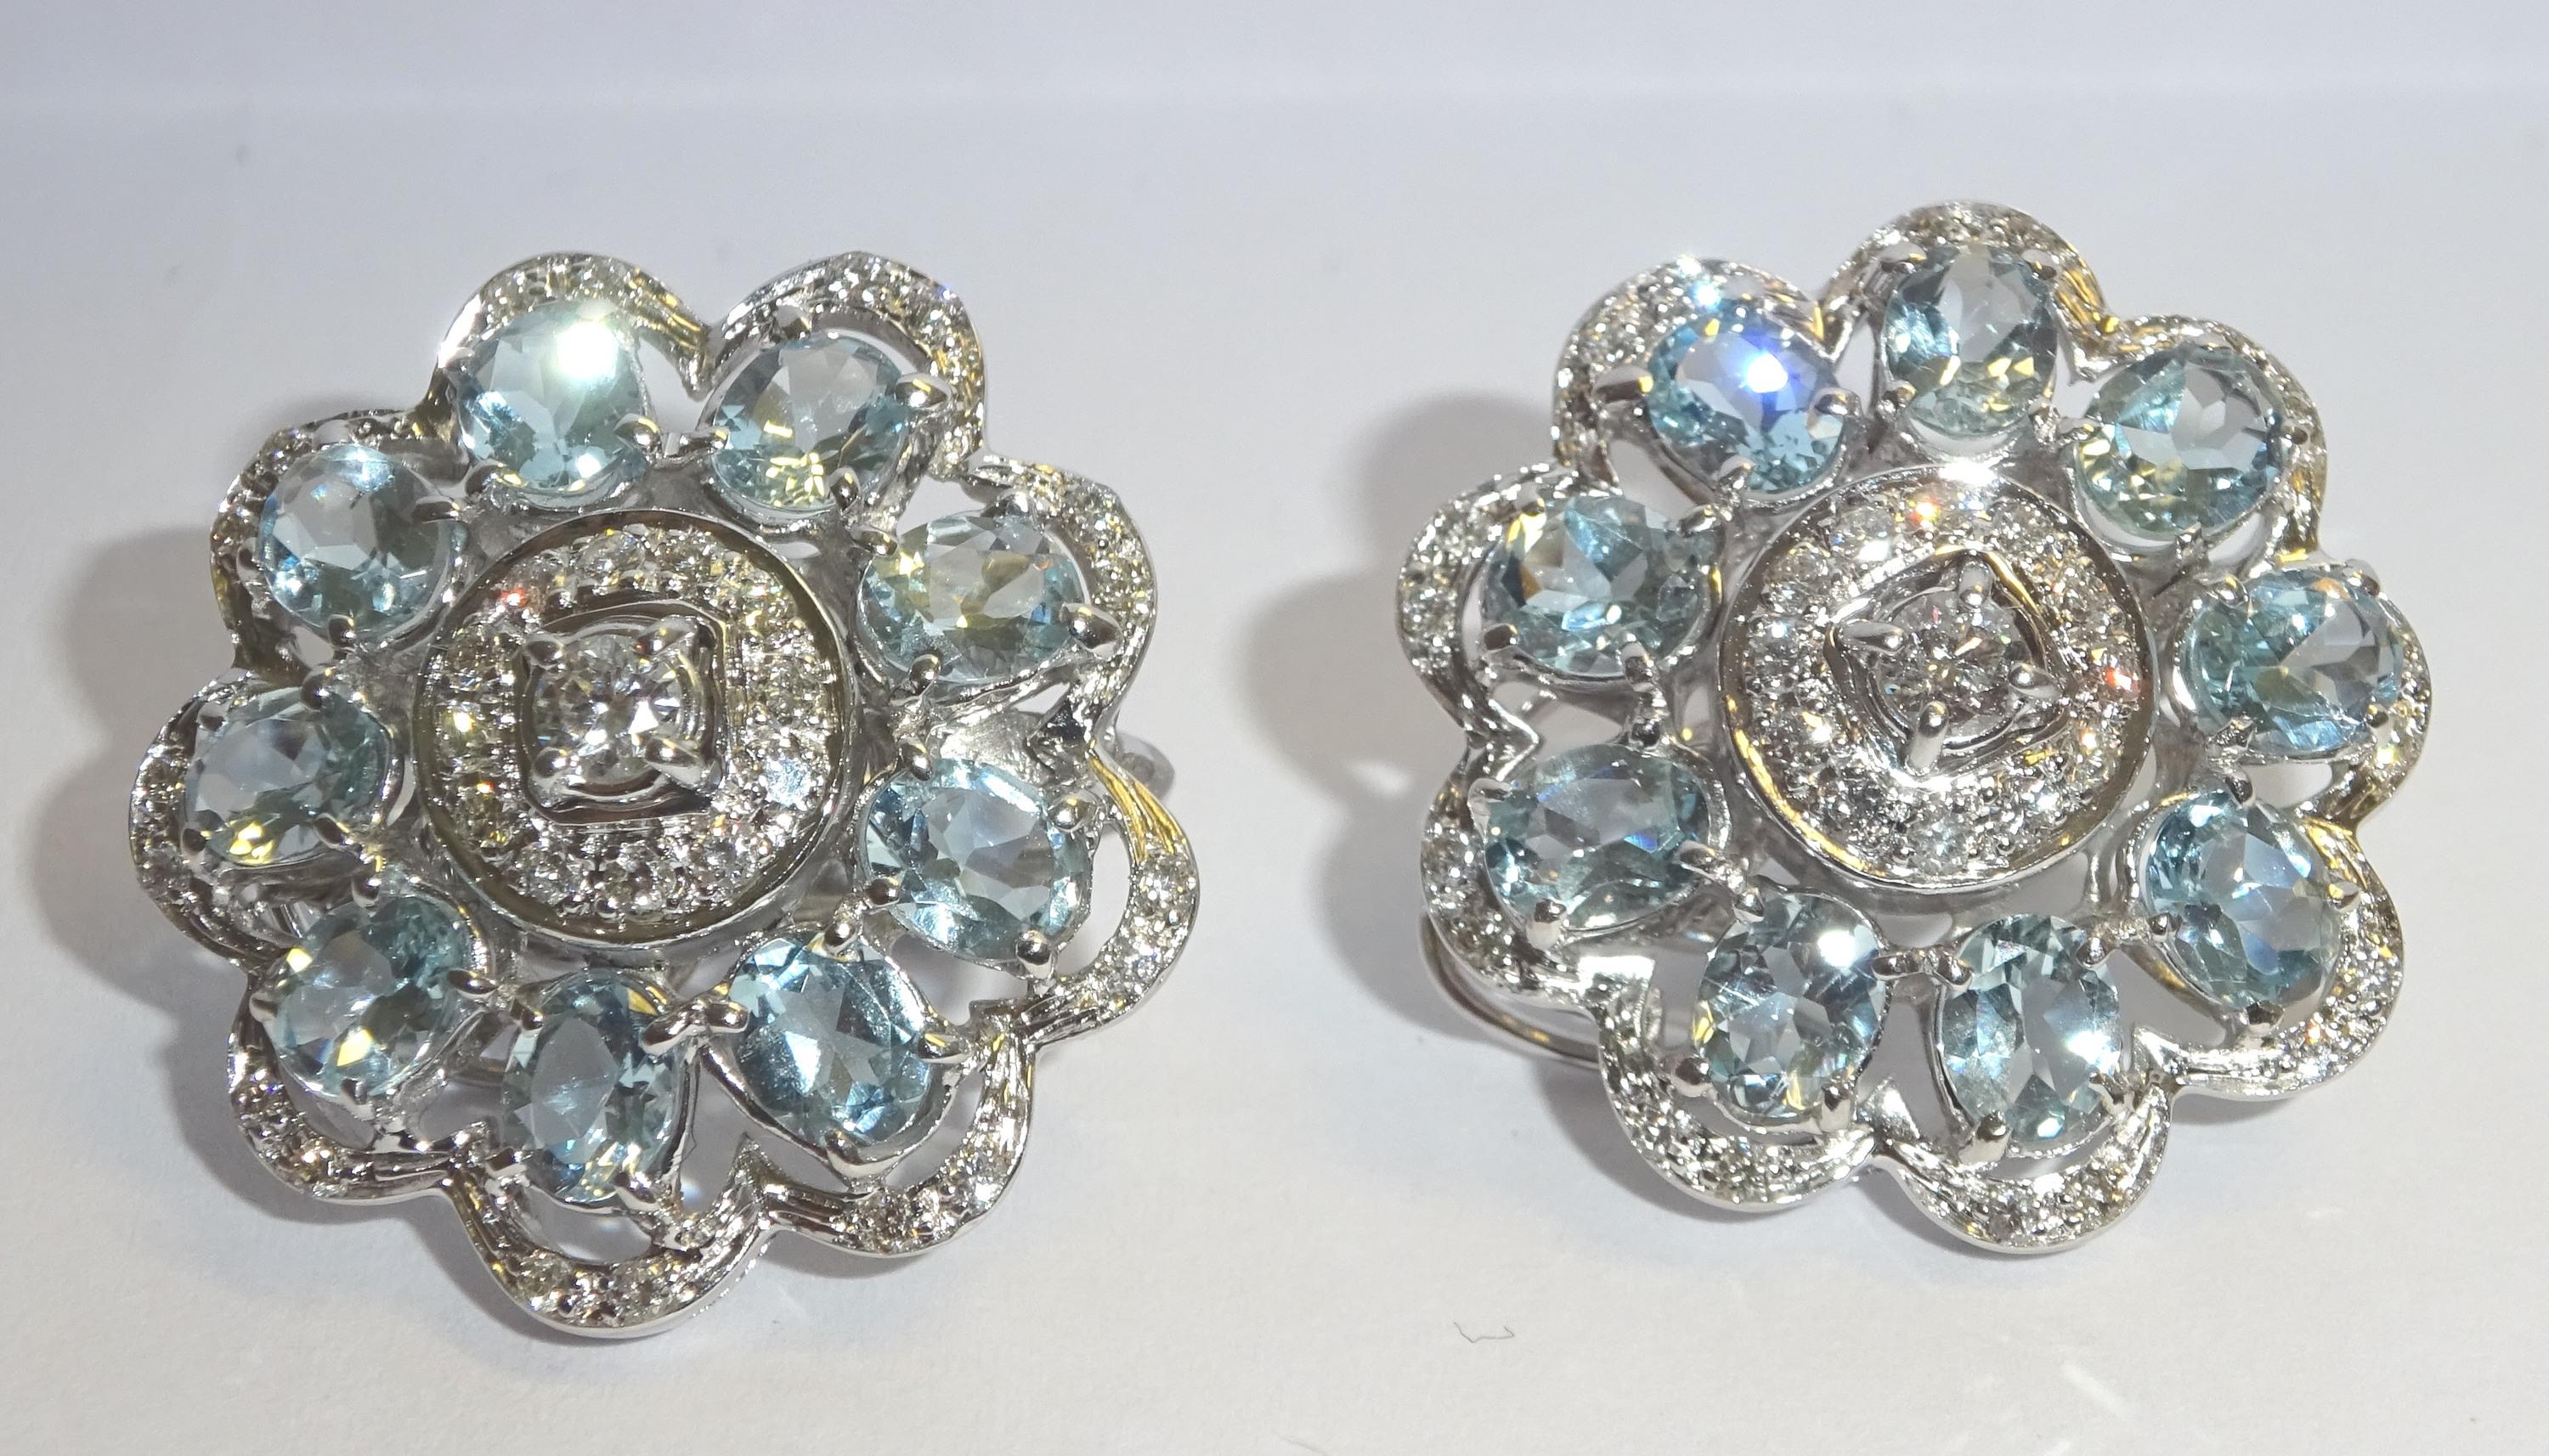 
Beautiful 18 Karat white gold cocktail earrings with  diamonds and Aquamarine .This Earrings combines classical with modern elements and can be worn every day! 
69 Diamonds 0.93 carat GVS
18 Aquamarine 5.27 ct.
 








Founded in 1974, Gianni